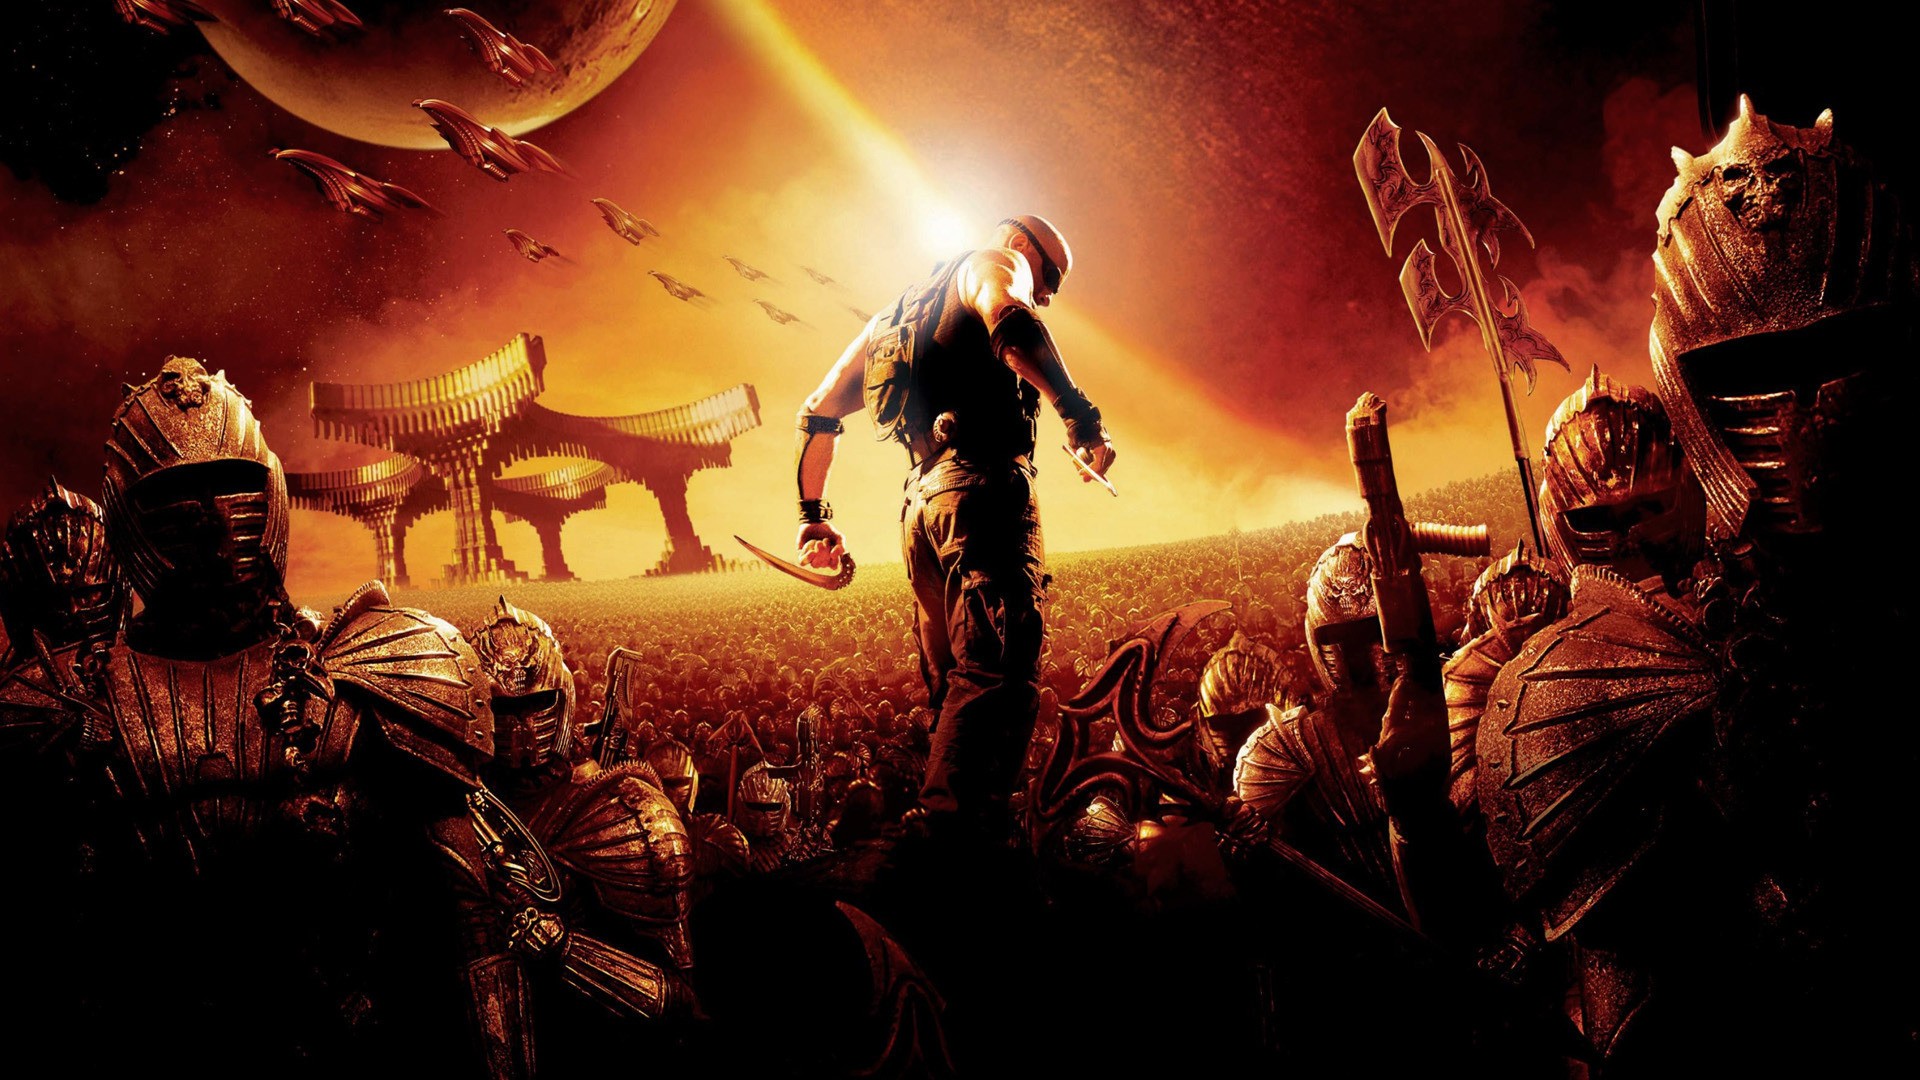 General 1920x1080 The Chronicles of Riddick Vin Diesel movies science fiction actor movie characters